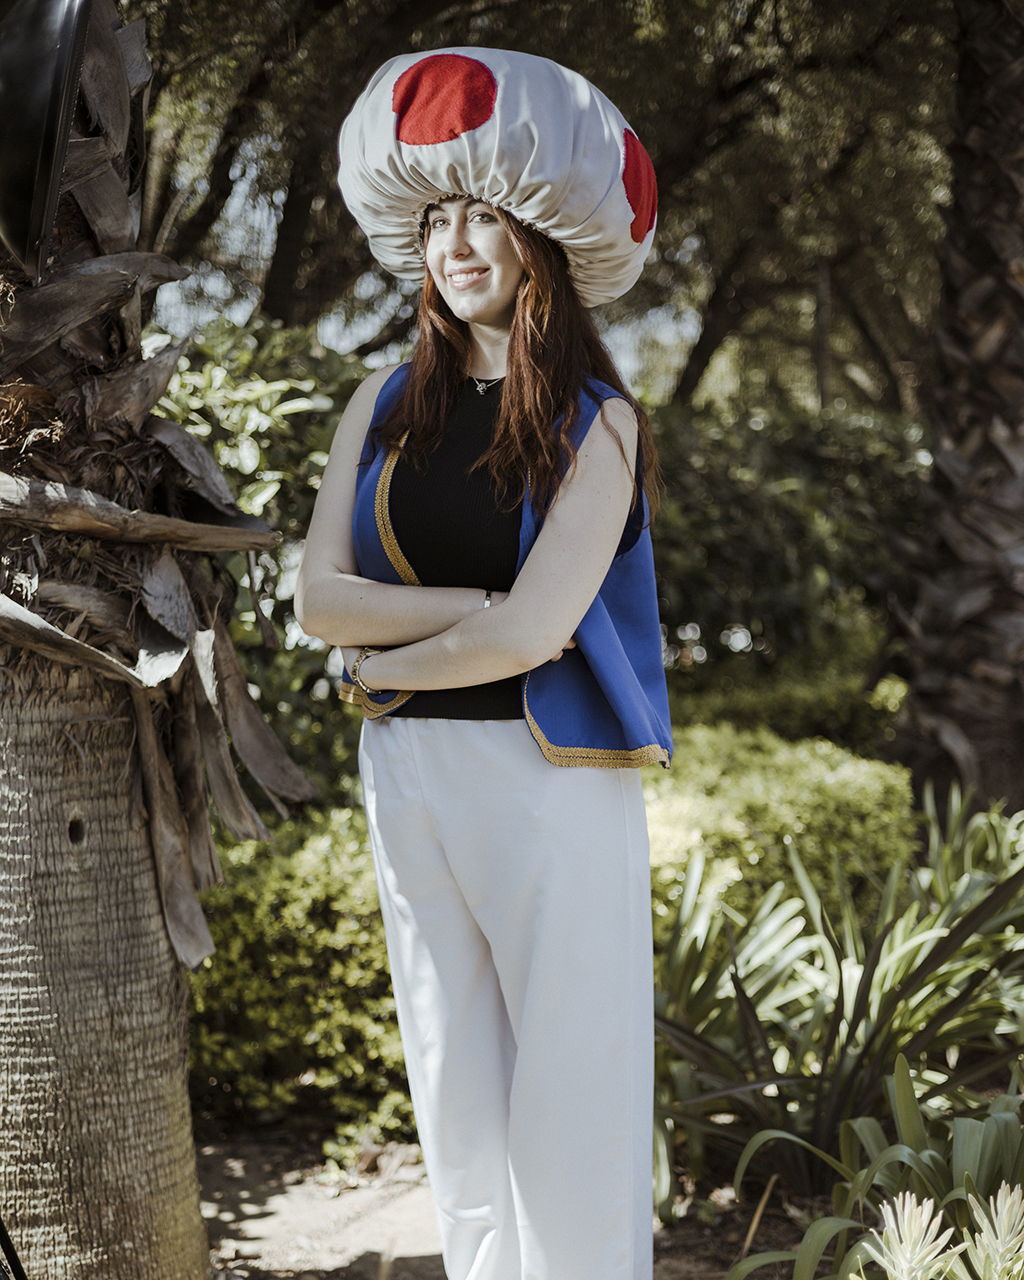 South African cosplayer Juliet De la Rey, 17, poses for a portrait while dressed as the fictional character Toad, from the Super Mario franchise.